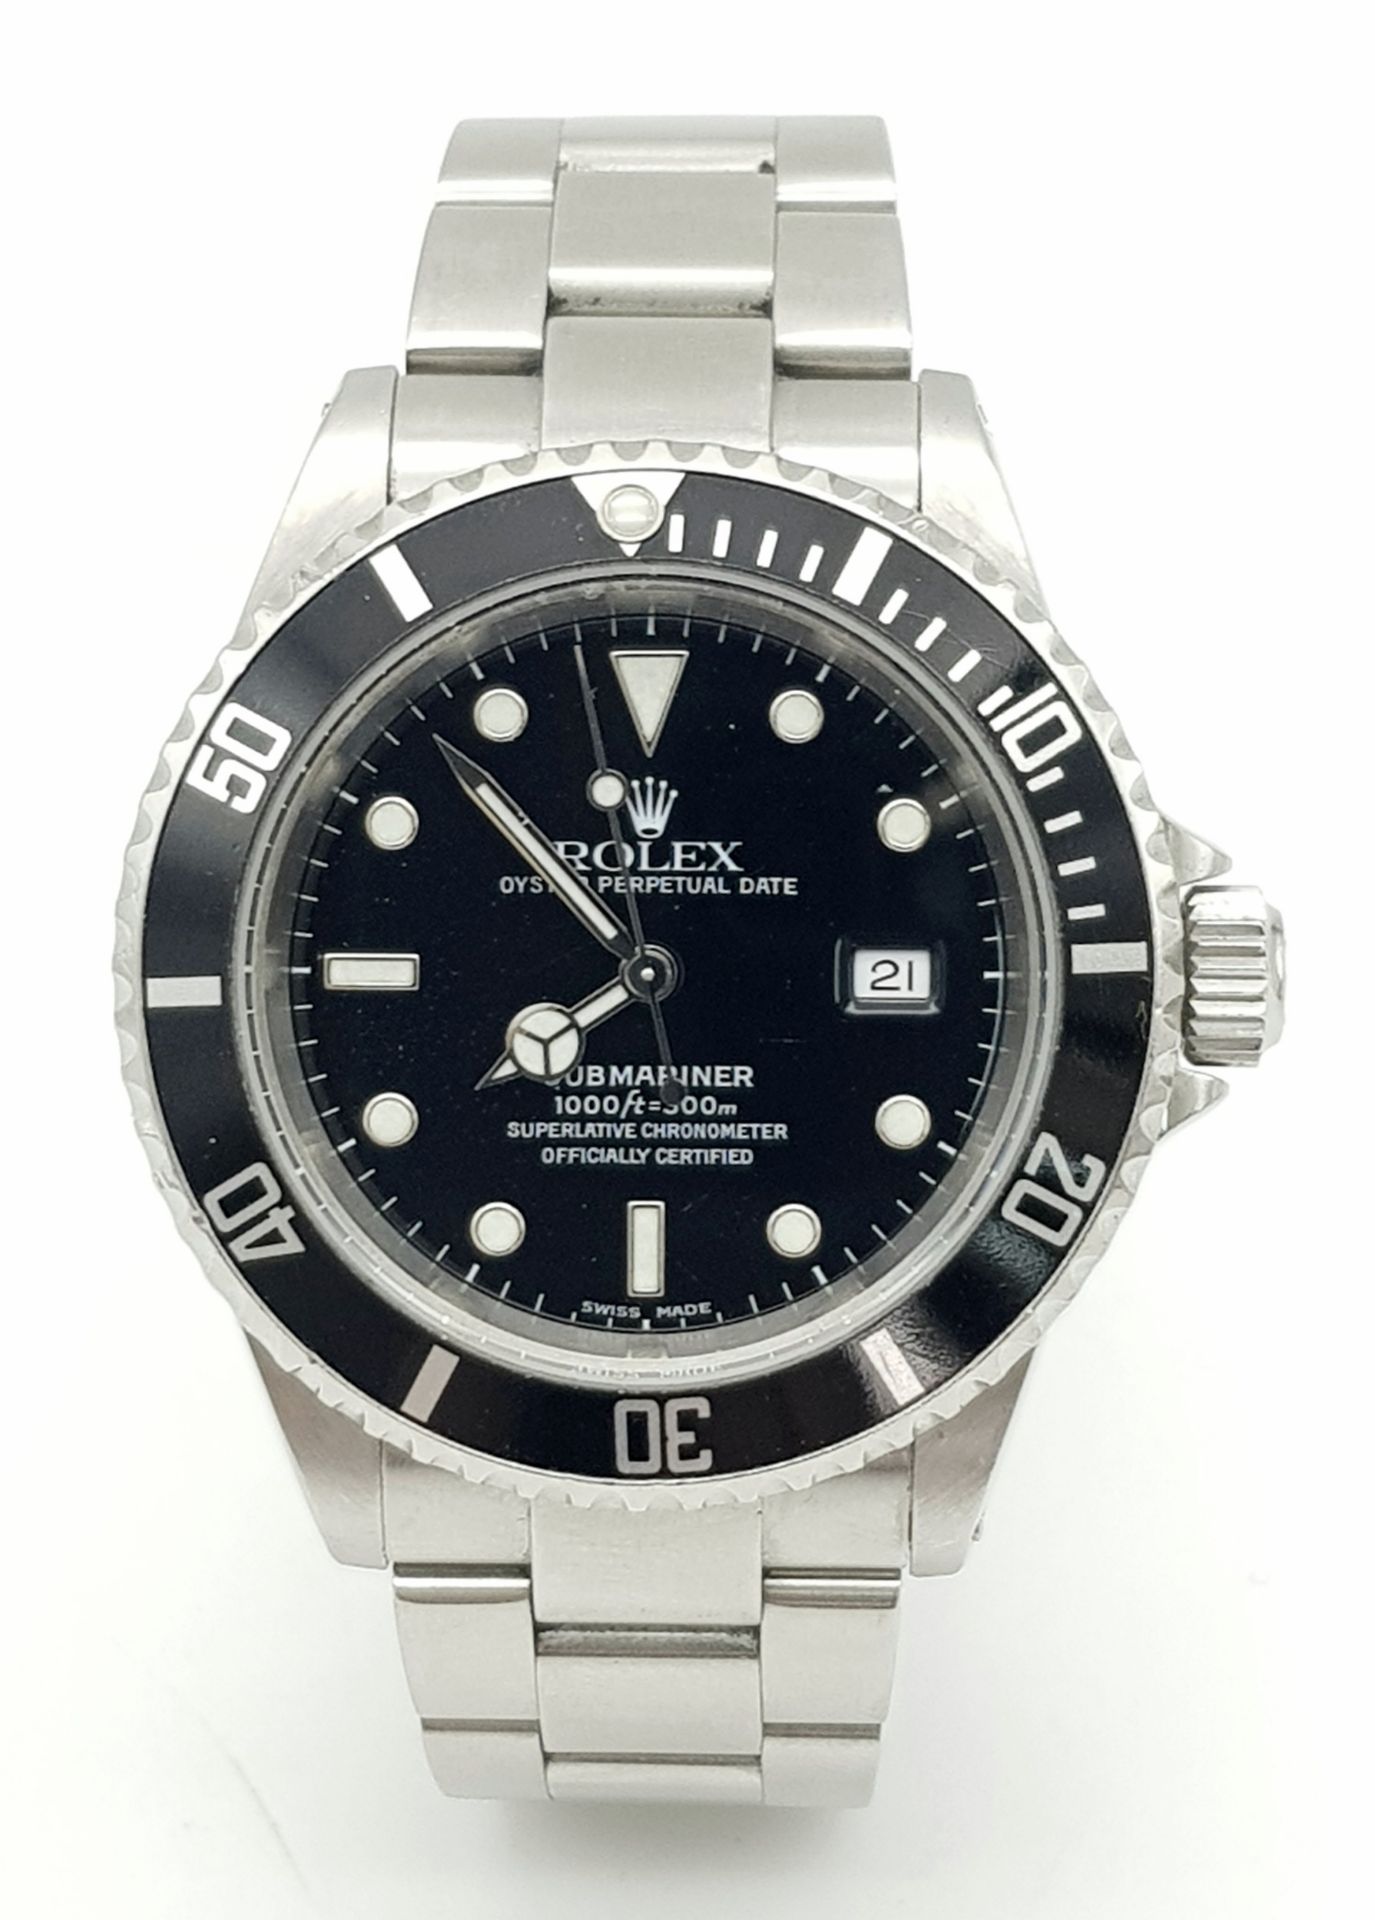 A Rolex Submariner Oyster Perpetual Date Watch. Stainless steel bracelet and case - 40mm. Black dial - Image 2 of 8